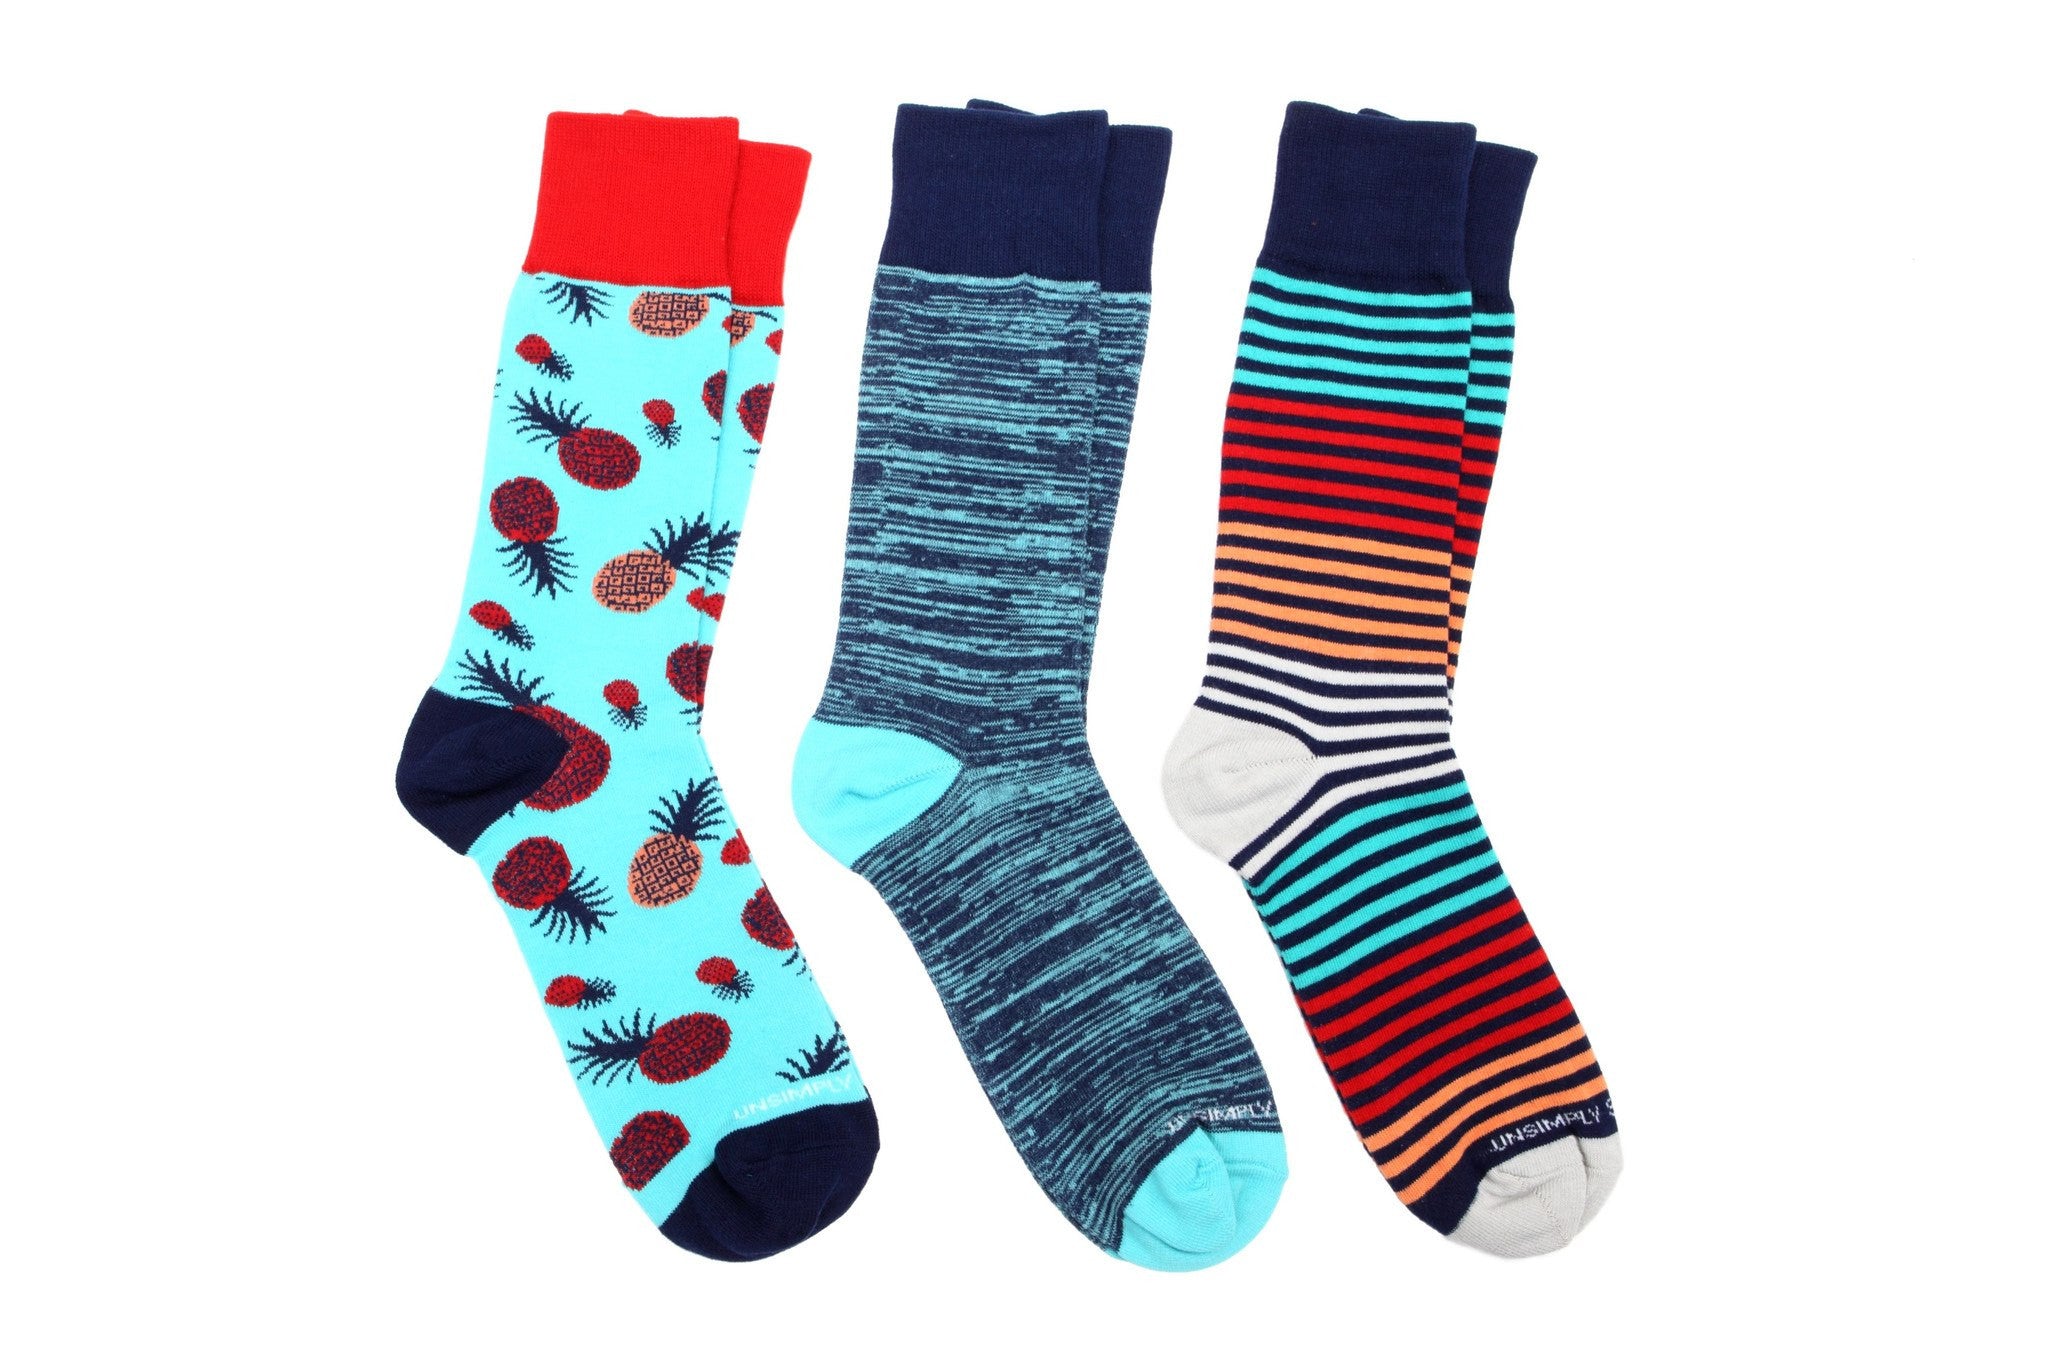 All Socks – Unsimply Stitched